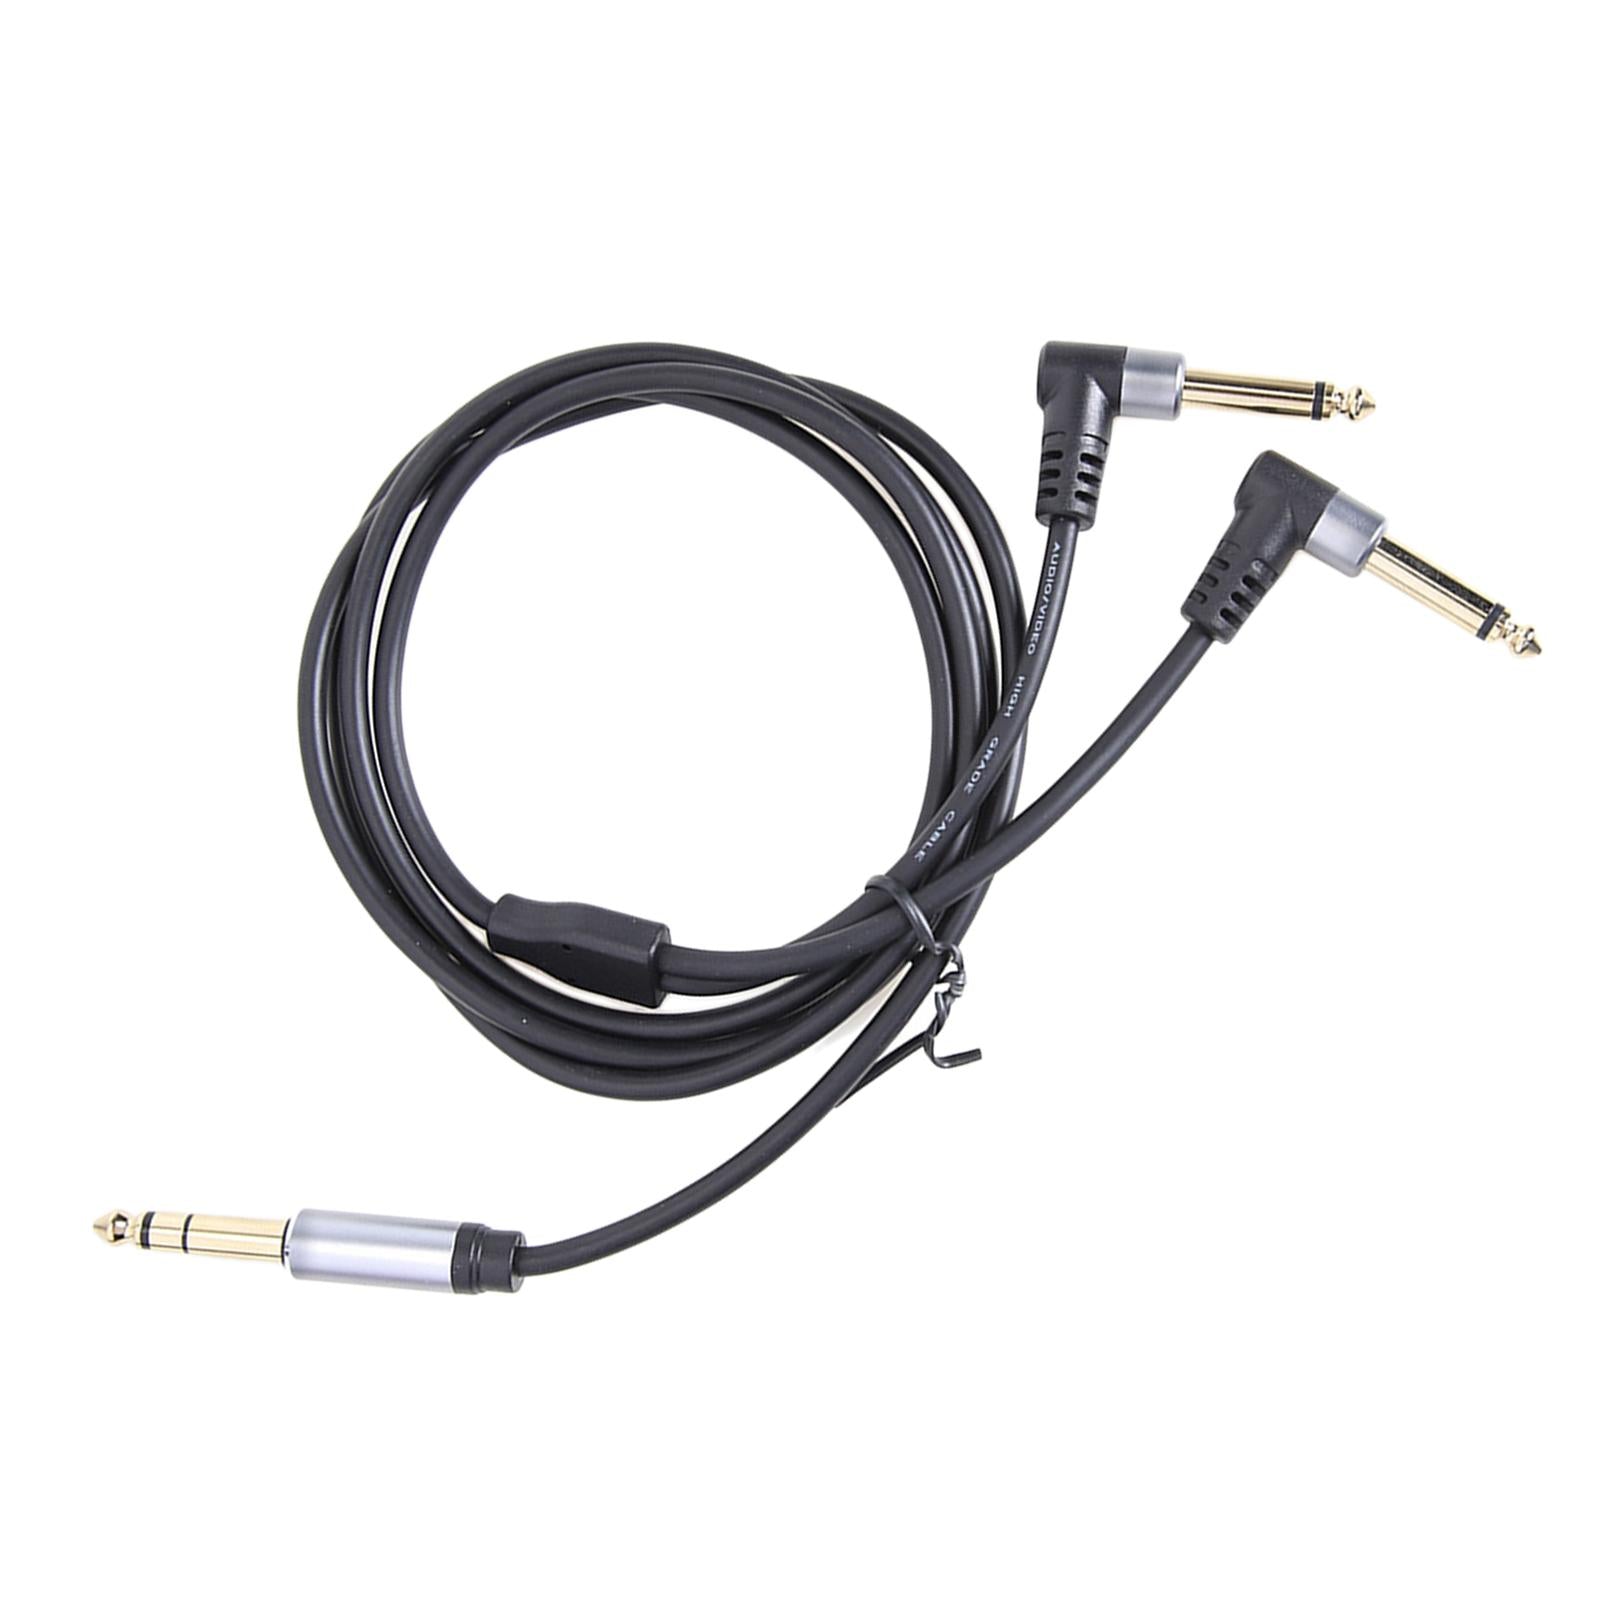 1/4 Insert Cable 6.35mm TRS to Dual 6.35mm TS for Sound Cards Amplifiers